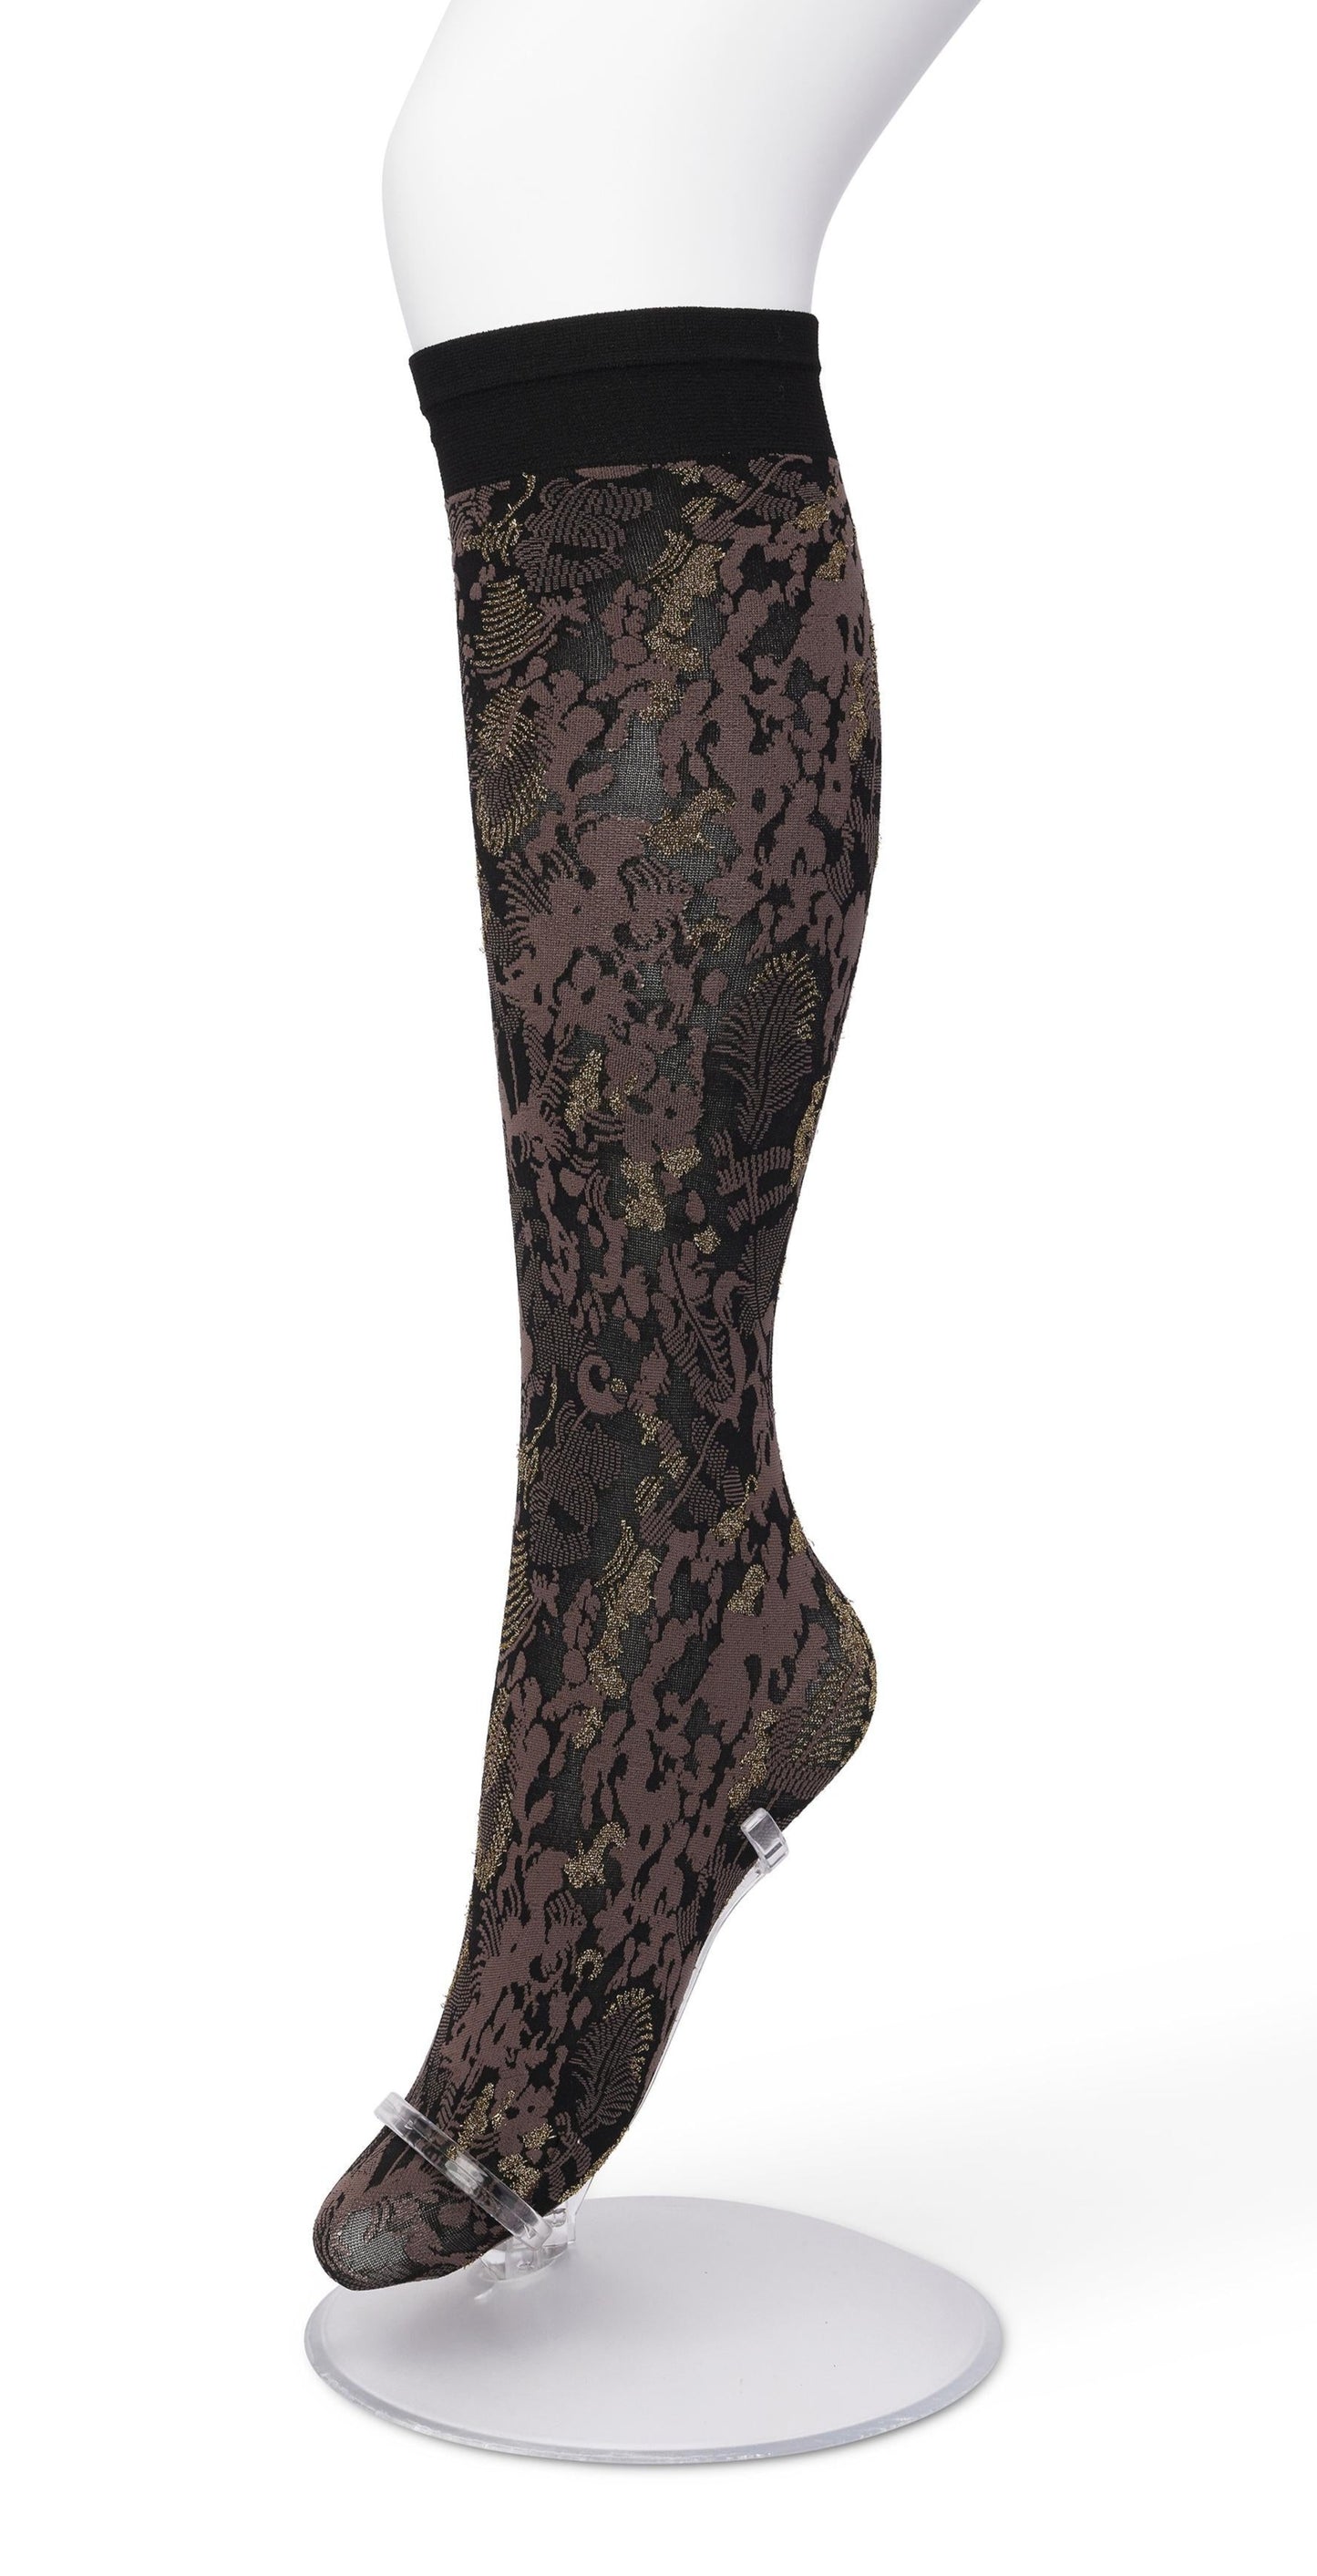 Bonnie Doon Botanical Lurex Knee-highs - Taupe brown (shopping bag) blue soft matte opaque fashion knee-high socks with a woven leaf style pattern in black and sparkly metallic gold and deep black comfort cuff.